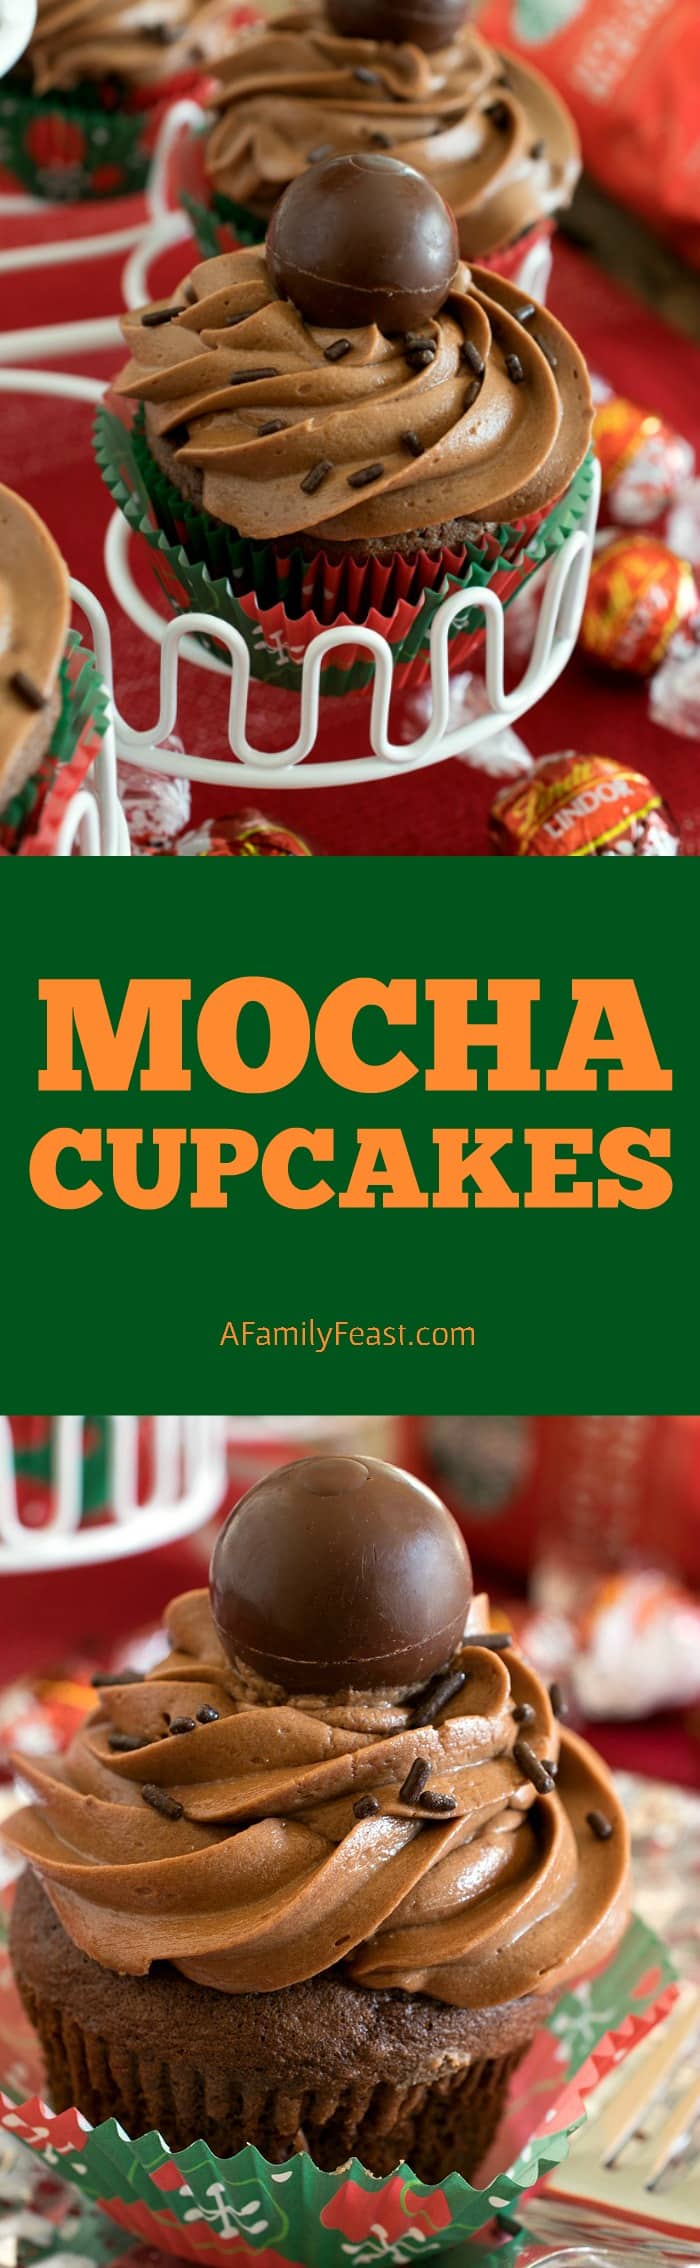 Mocha Cupcakes recipe and gift giving ideas for the holidays including #StarbucksPerfectPairings 